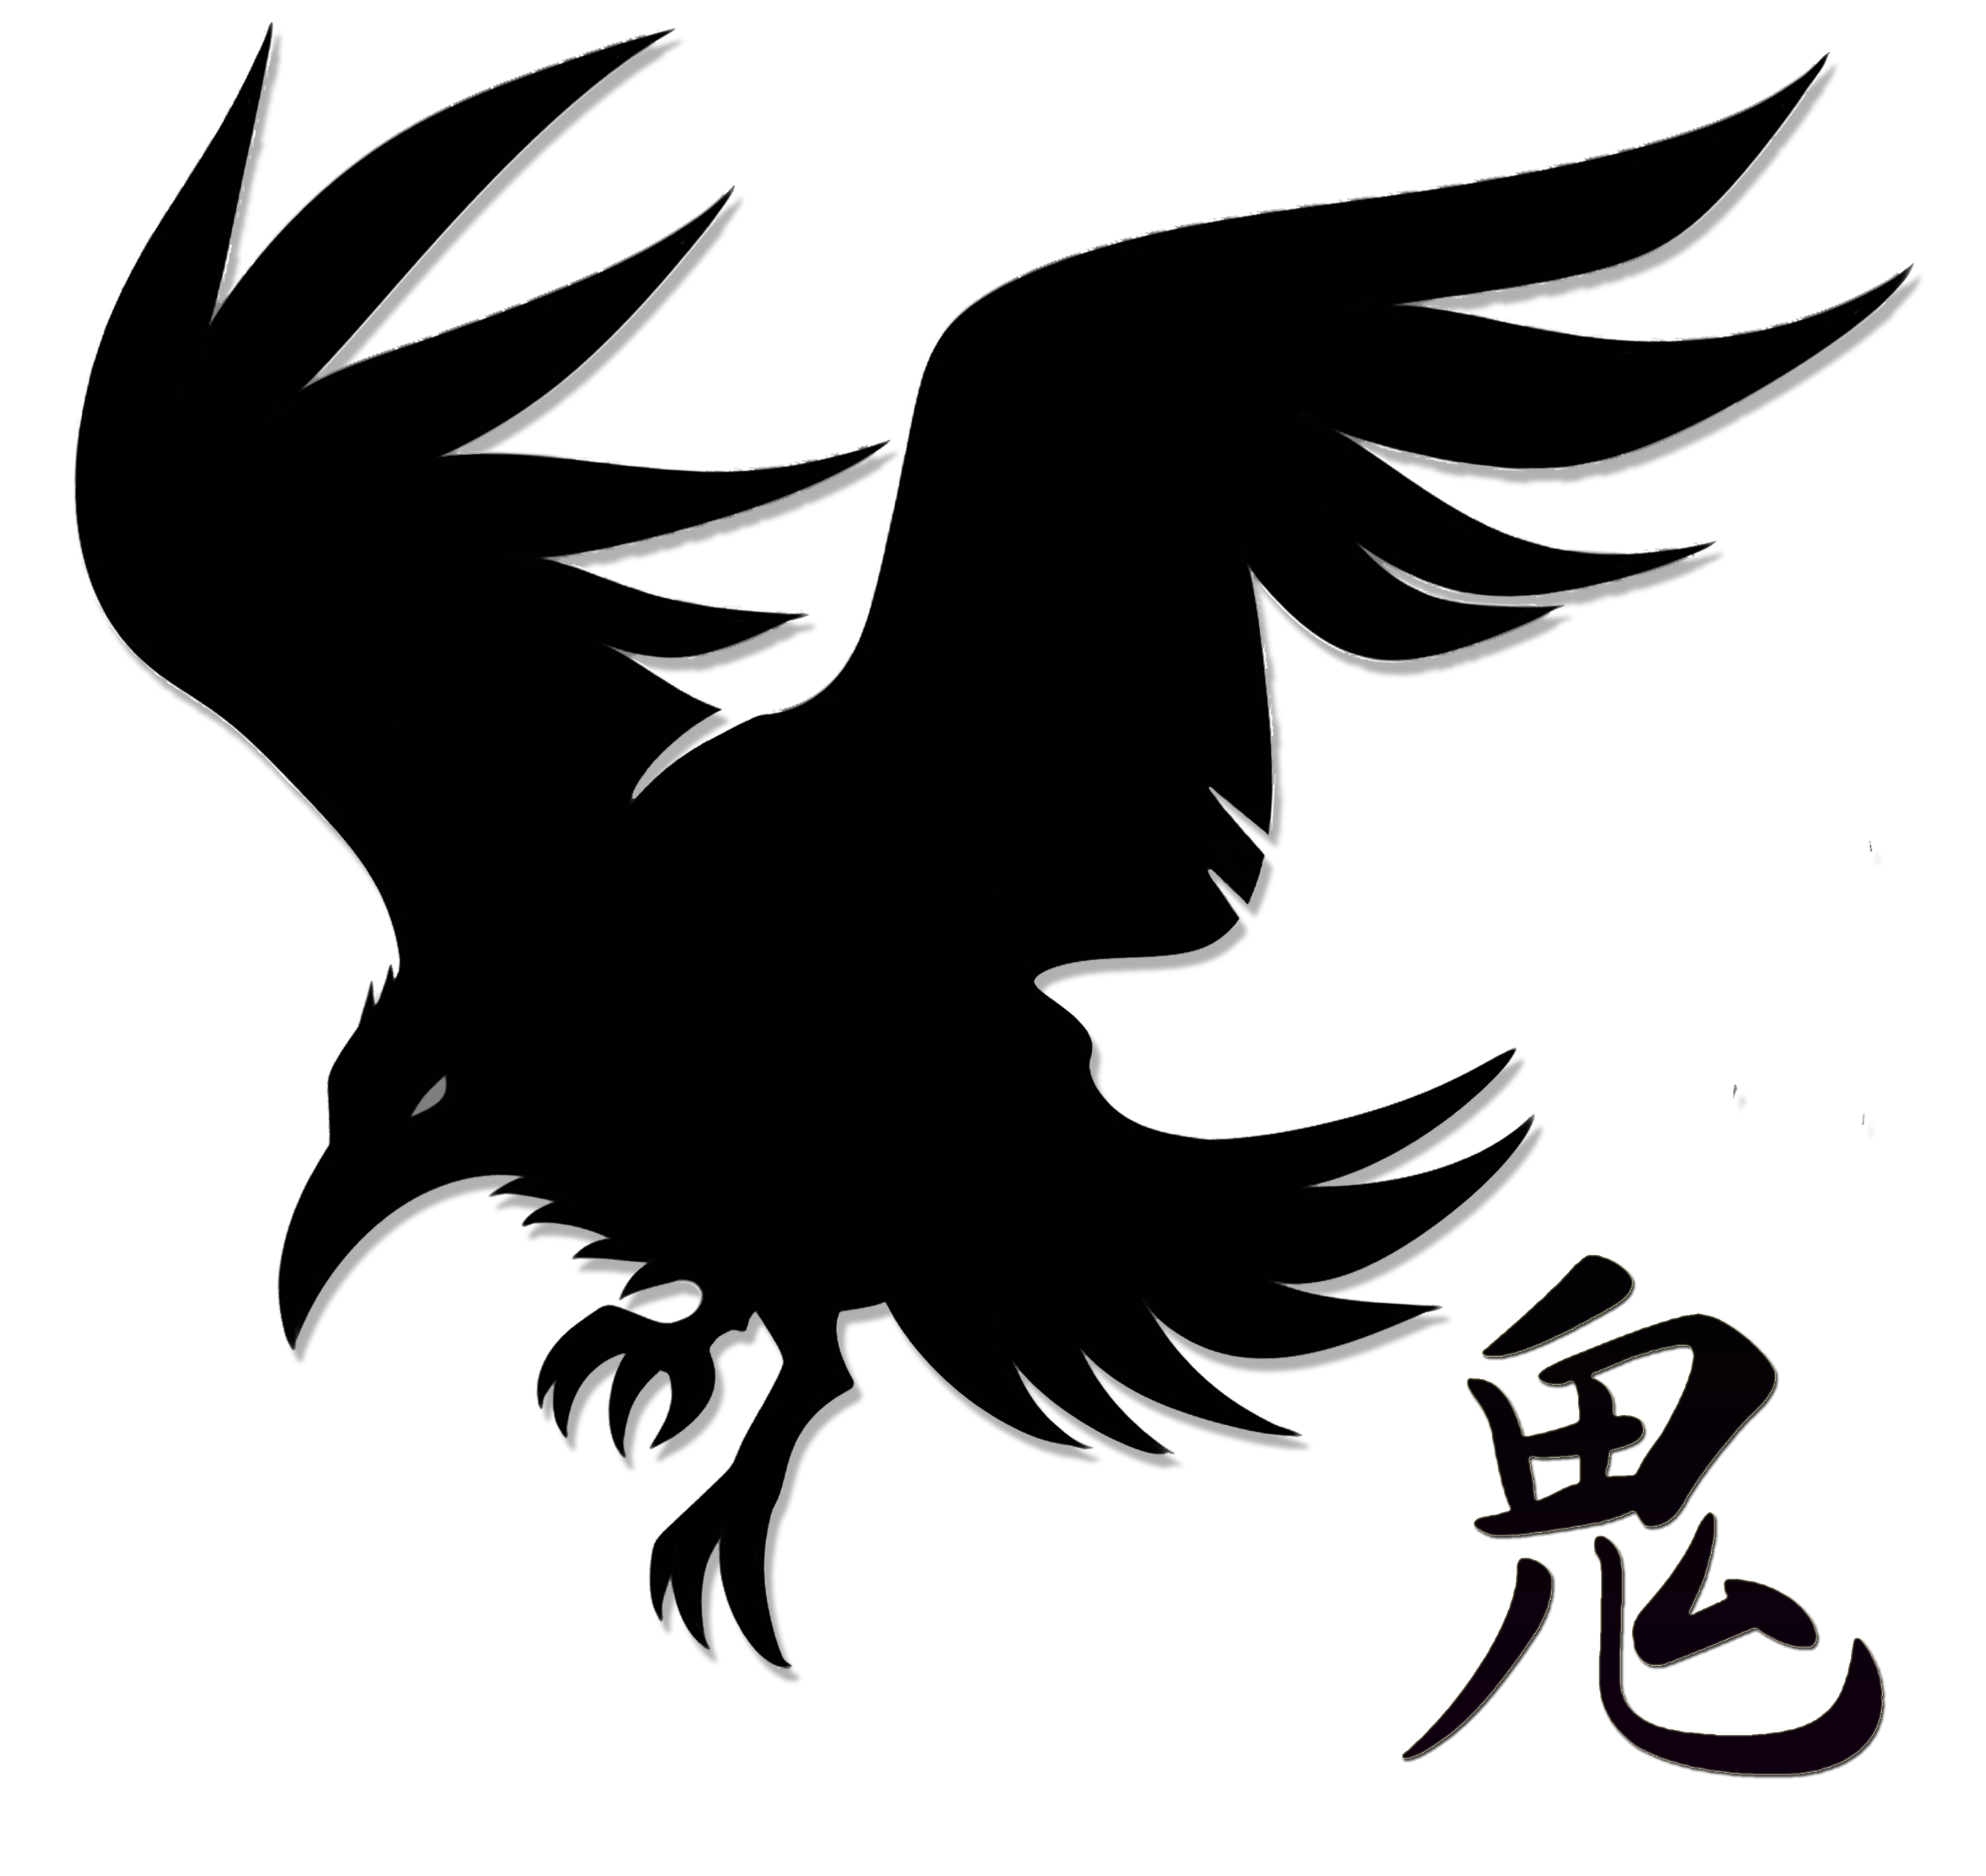 crow clipart drawing